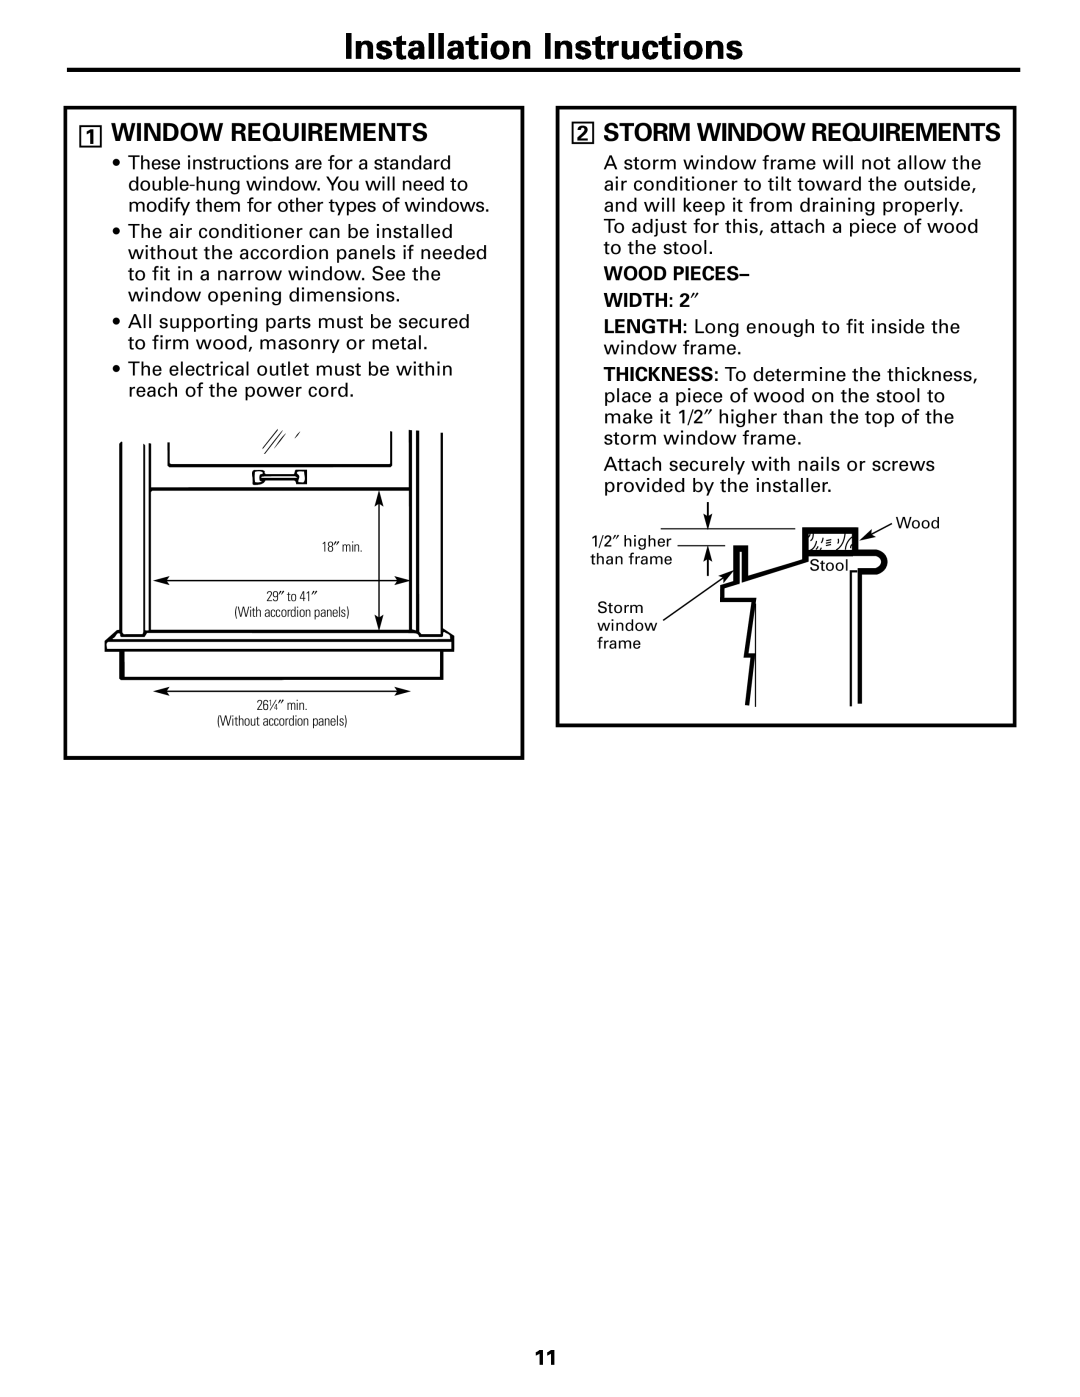 GE AGF18 1WINDOW REQUIREMENTS, 2STORM WINDOW REQUIREMENTS, Installation Instructions, WOOD PIECES- WIDTH 2″ 